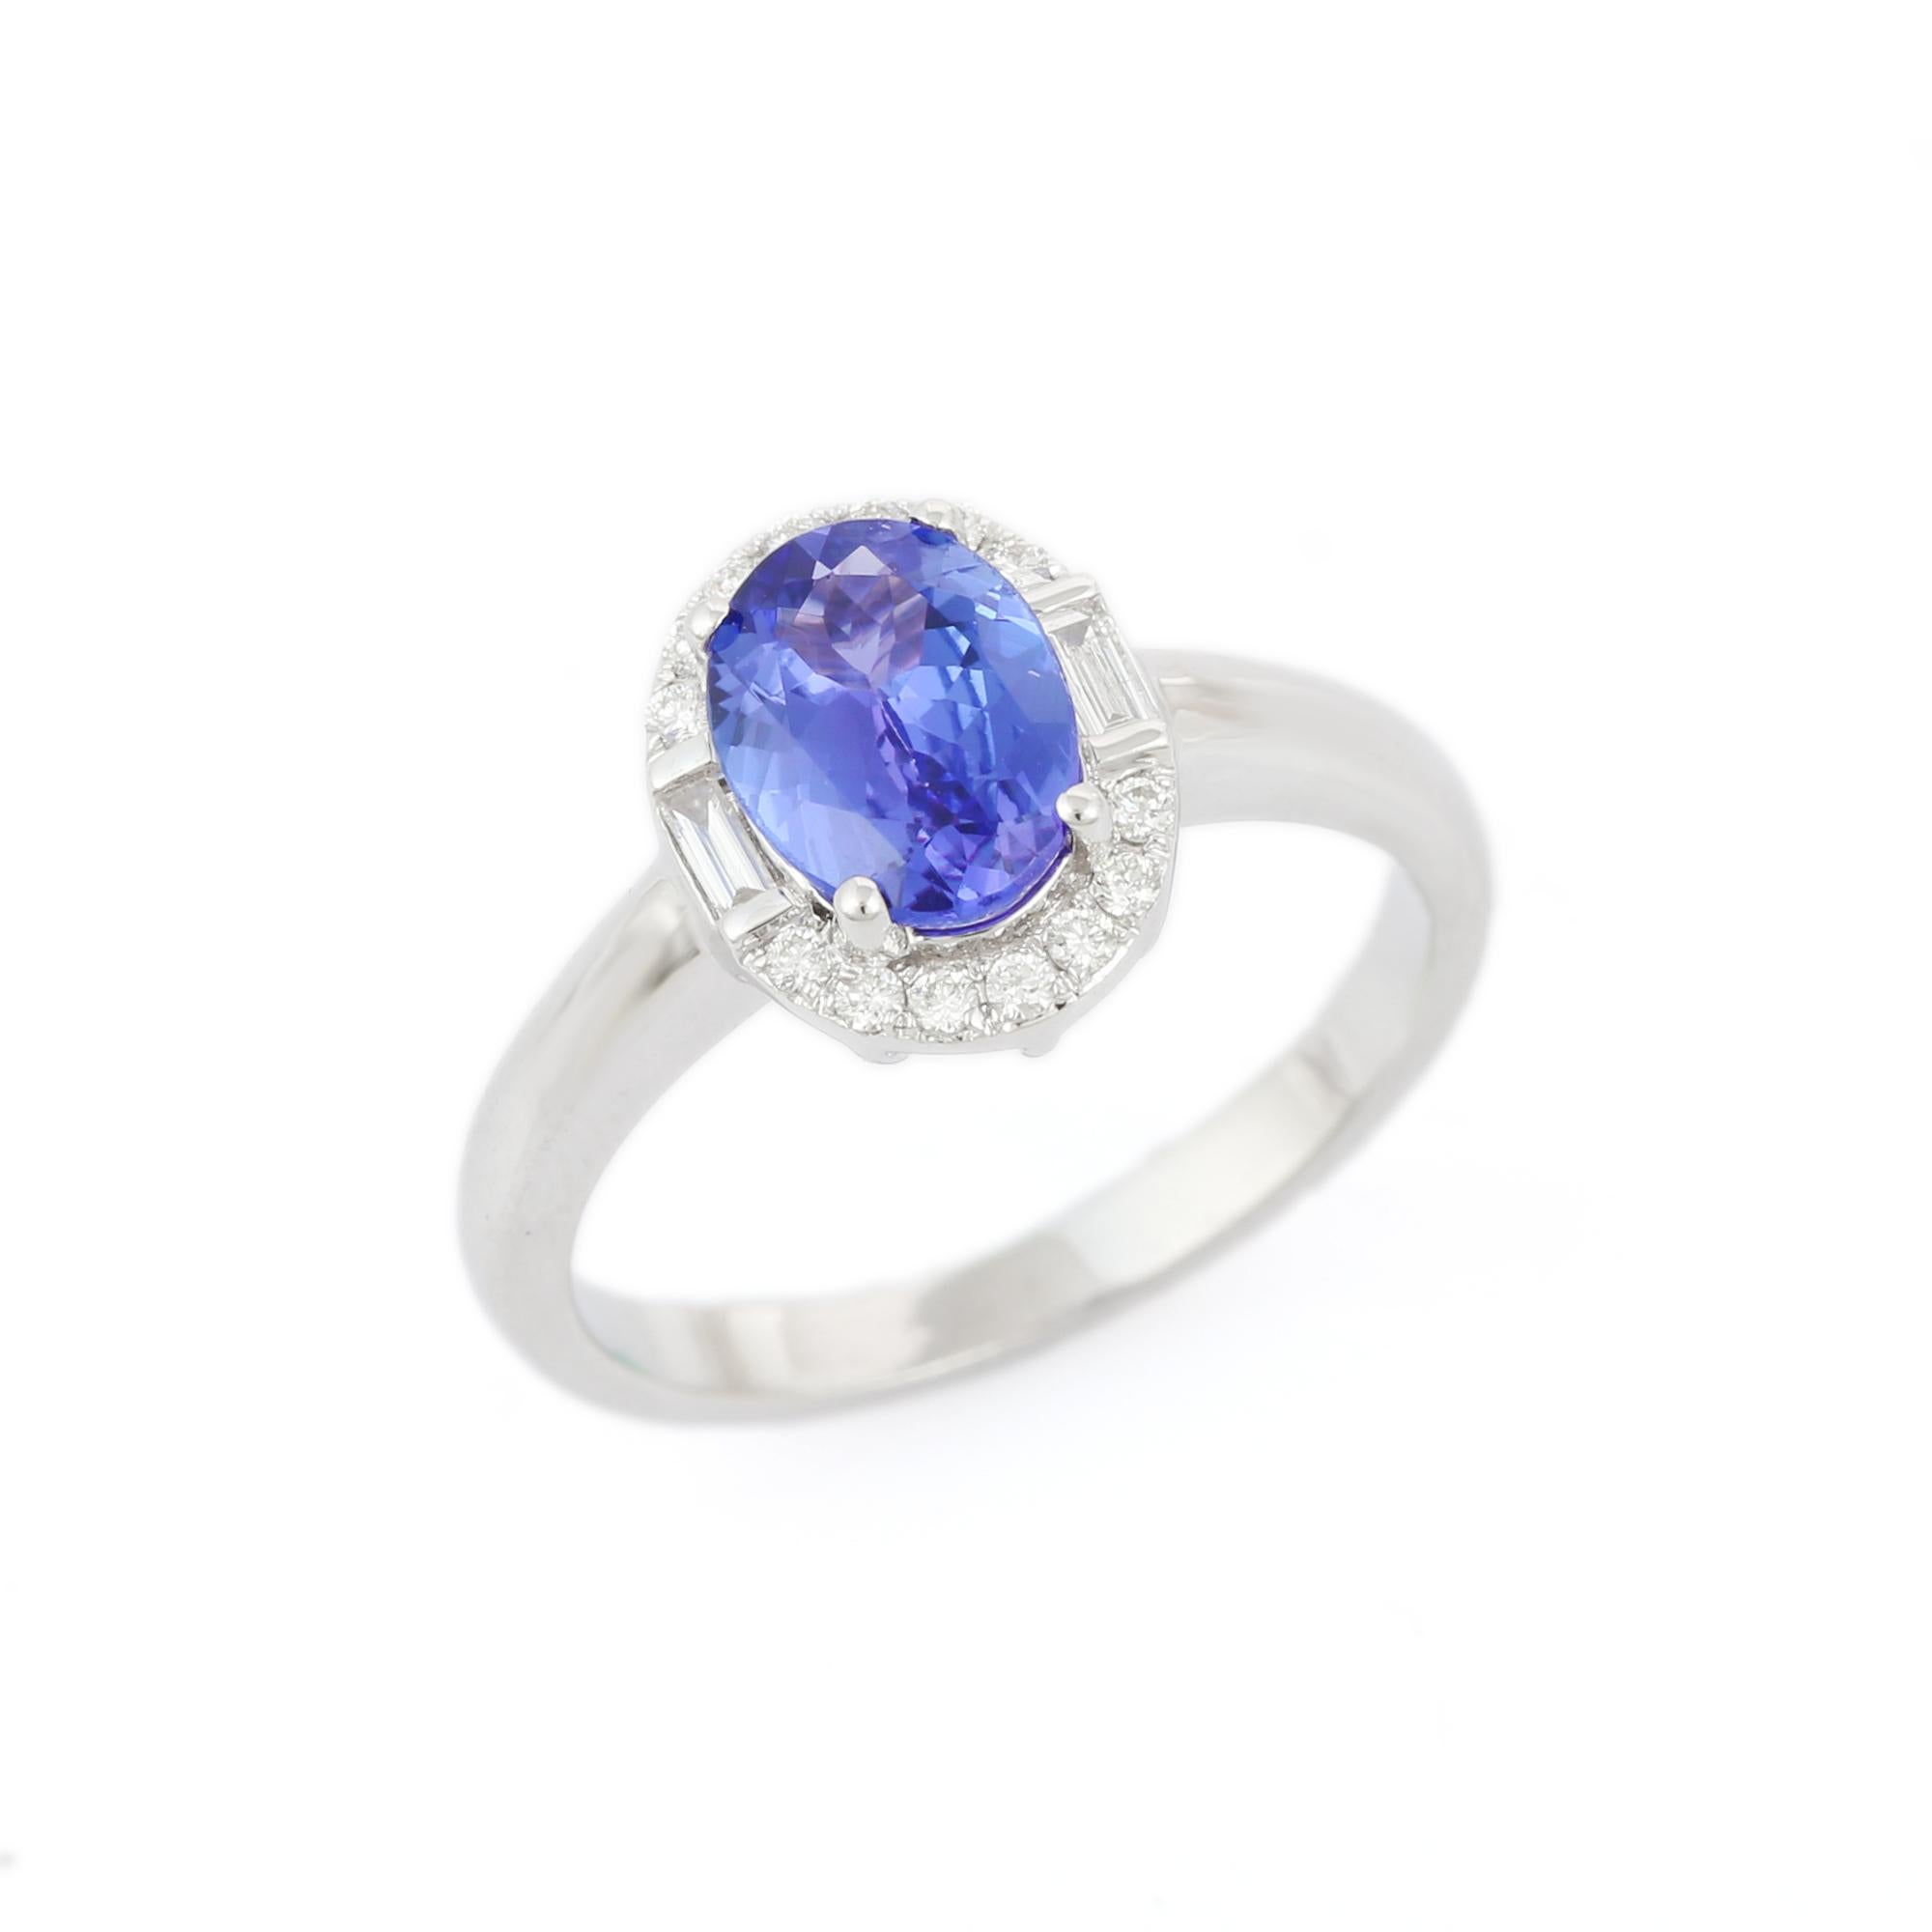 For Sale:  Oval Shape Tanzanite and Diamond Wedding Ring in 18k Solid White Gold 4